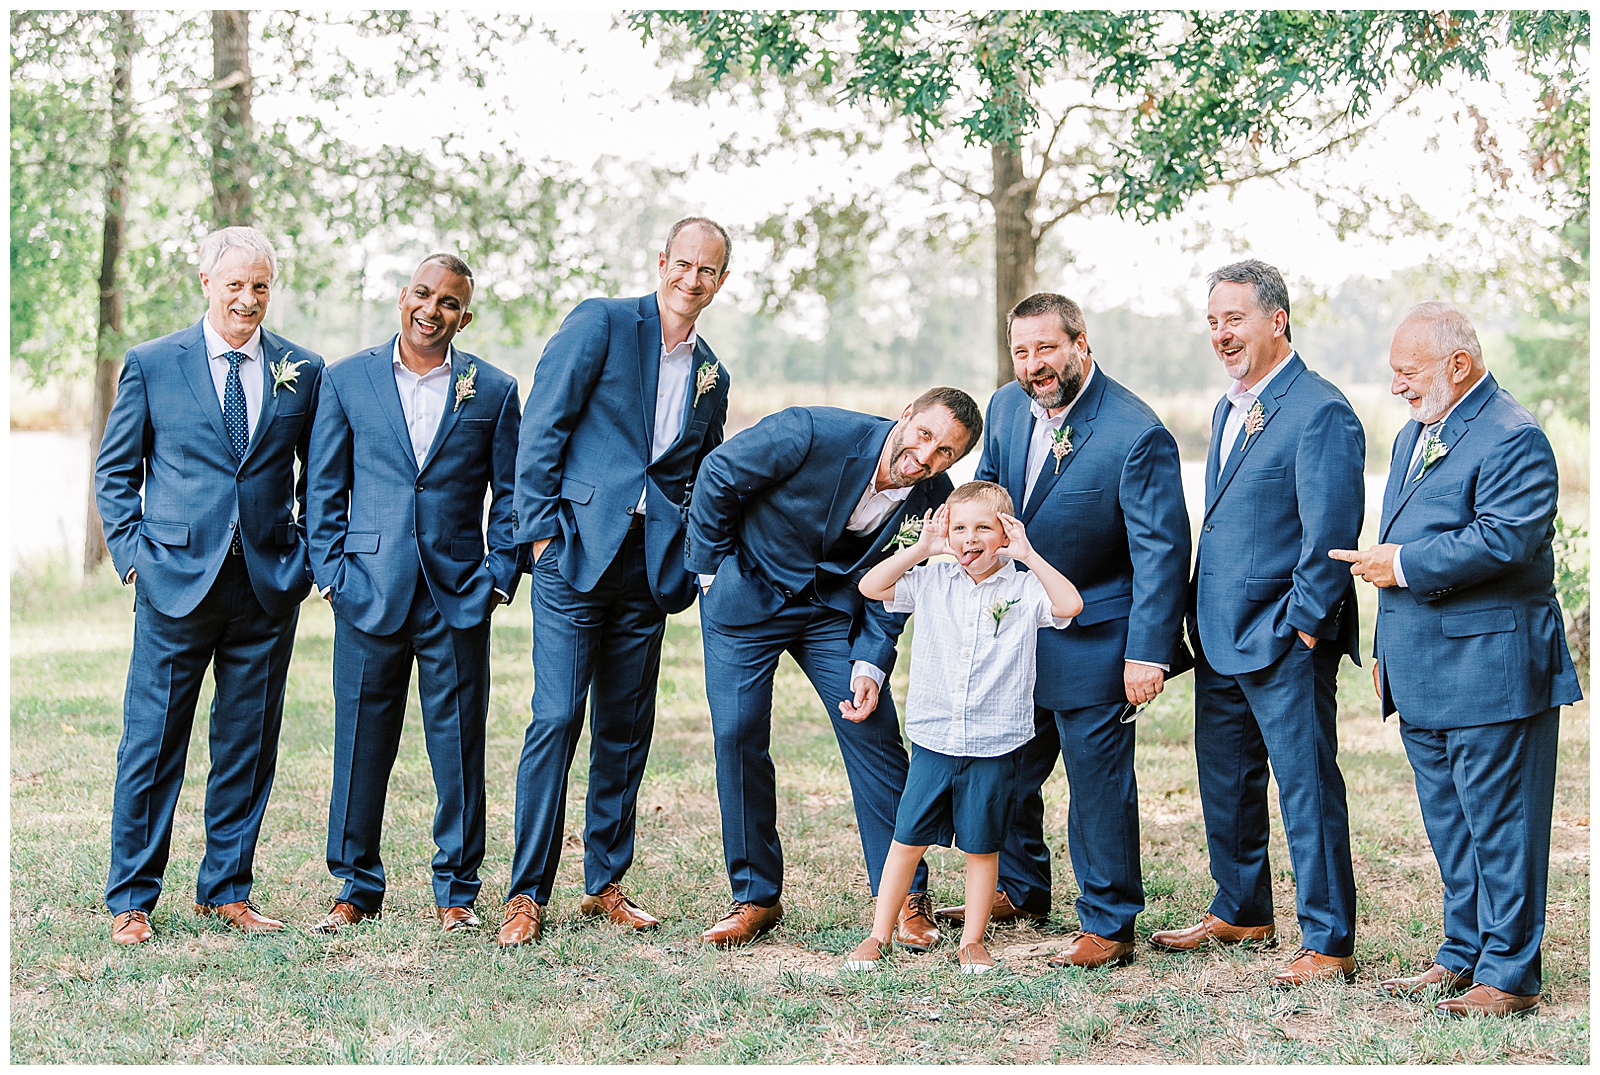 groomsmen group portrait in navy blue suits with silly son of groom